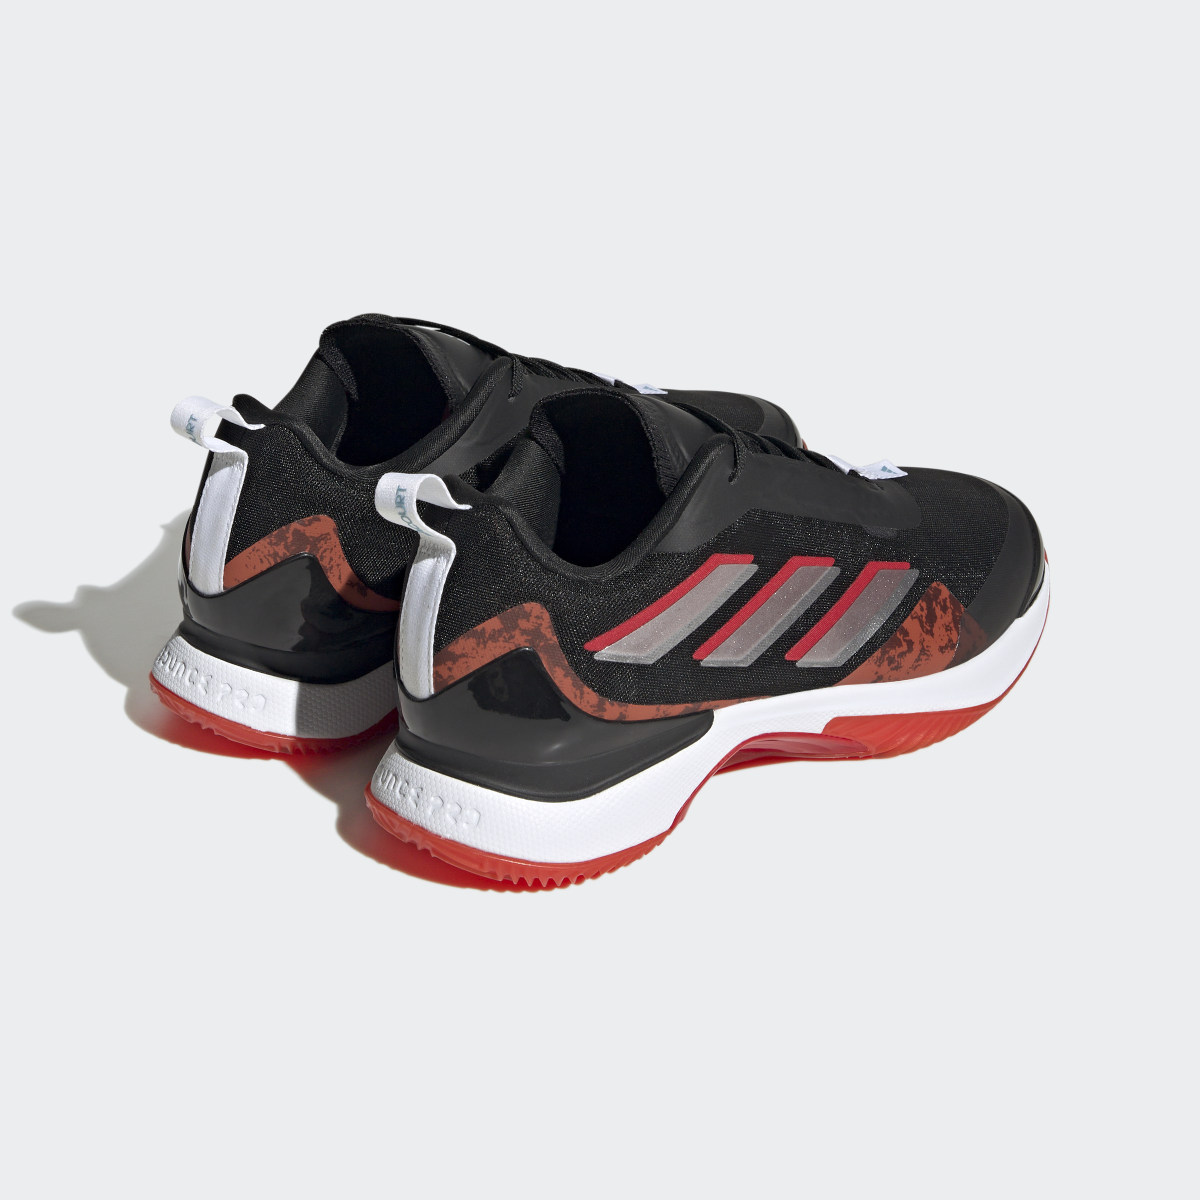 Adidas Avacourt Clay Court Tennis Shoes. 9